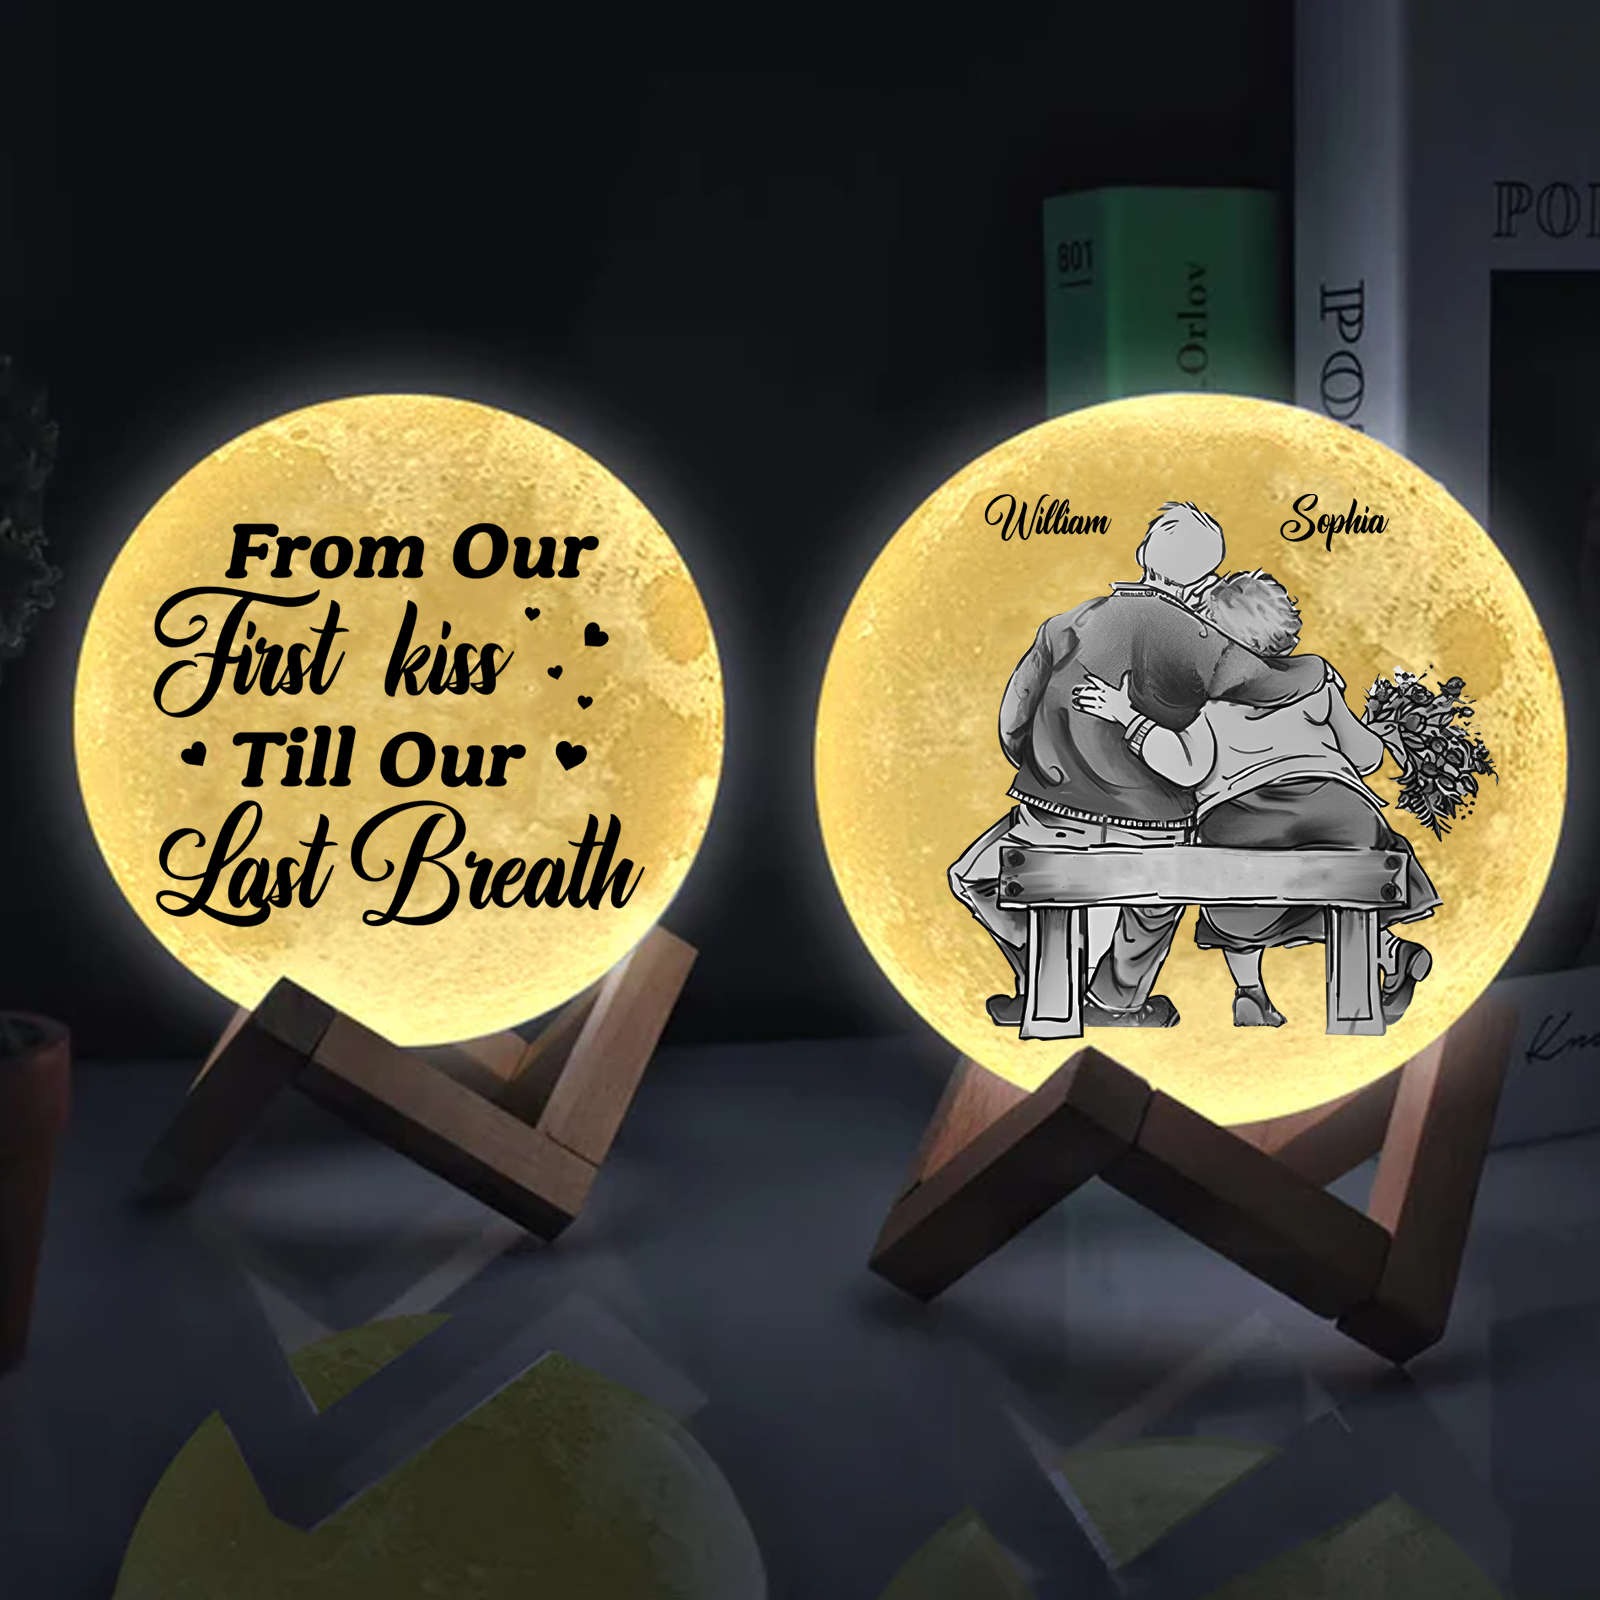 From Our First Kiss Till Our Last Breath - Custom Name - Personalized Moon Lamp - Gift For Family, Couple